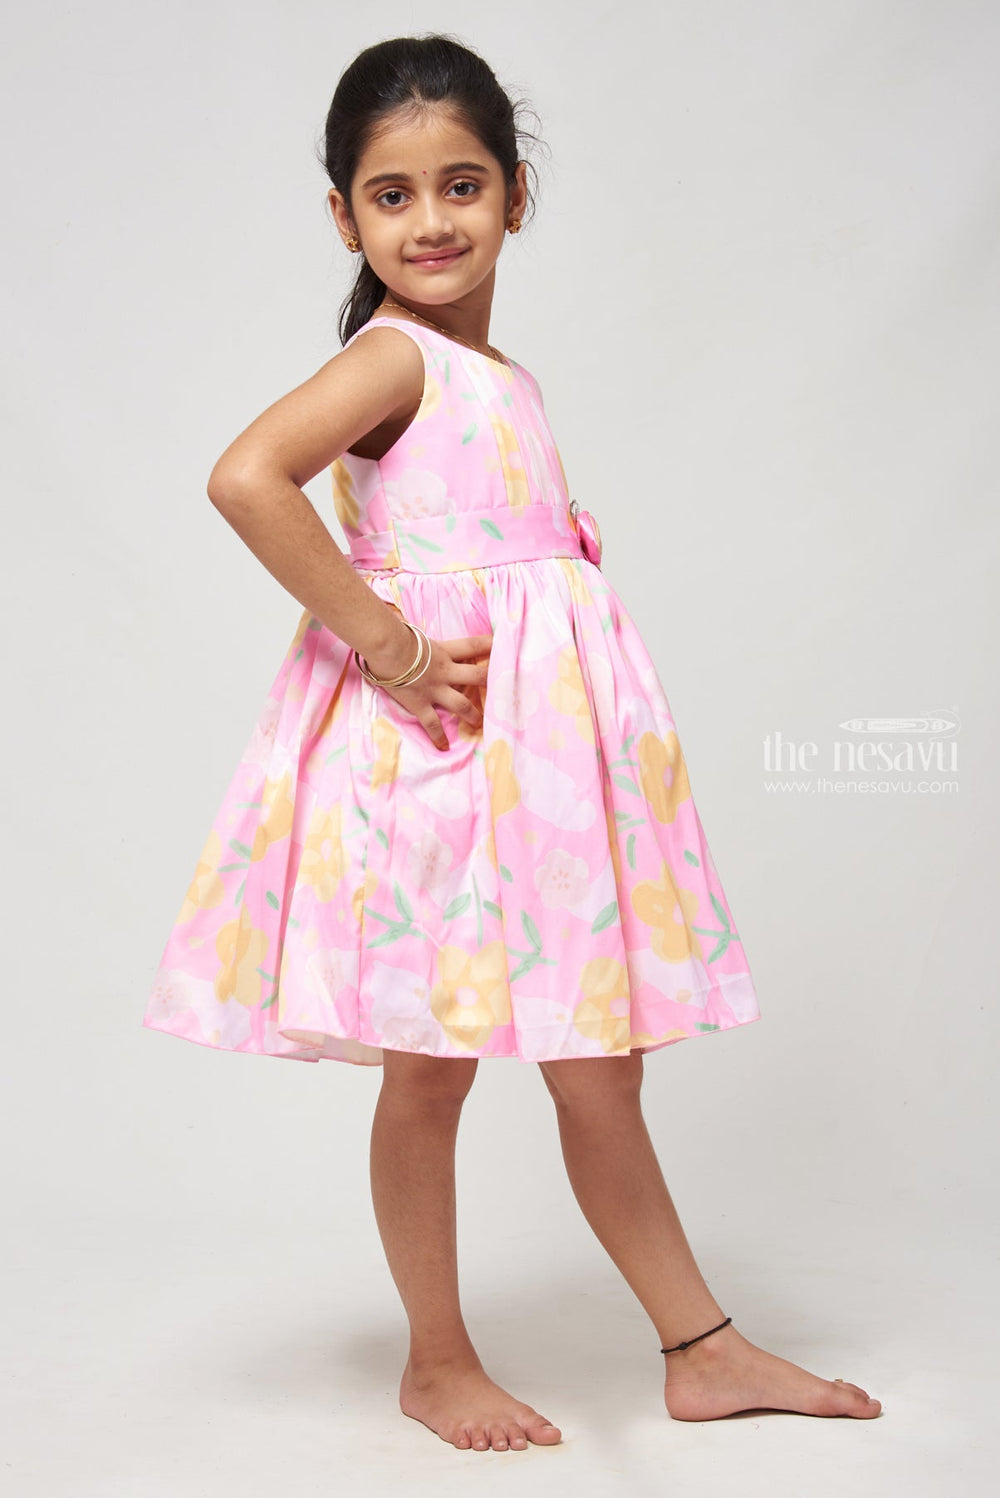 The Nesavu Girls Fancy Frock Cold-Shoulder Design Frock with Puffed Sleeves and Intricate Stitch Details Nesavu Girls’ Boutique Birthday Dress - Knee-length Charm For Casual Outings | The Nesavu